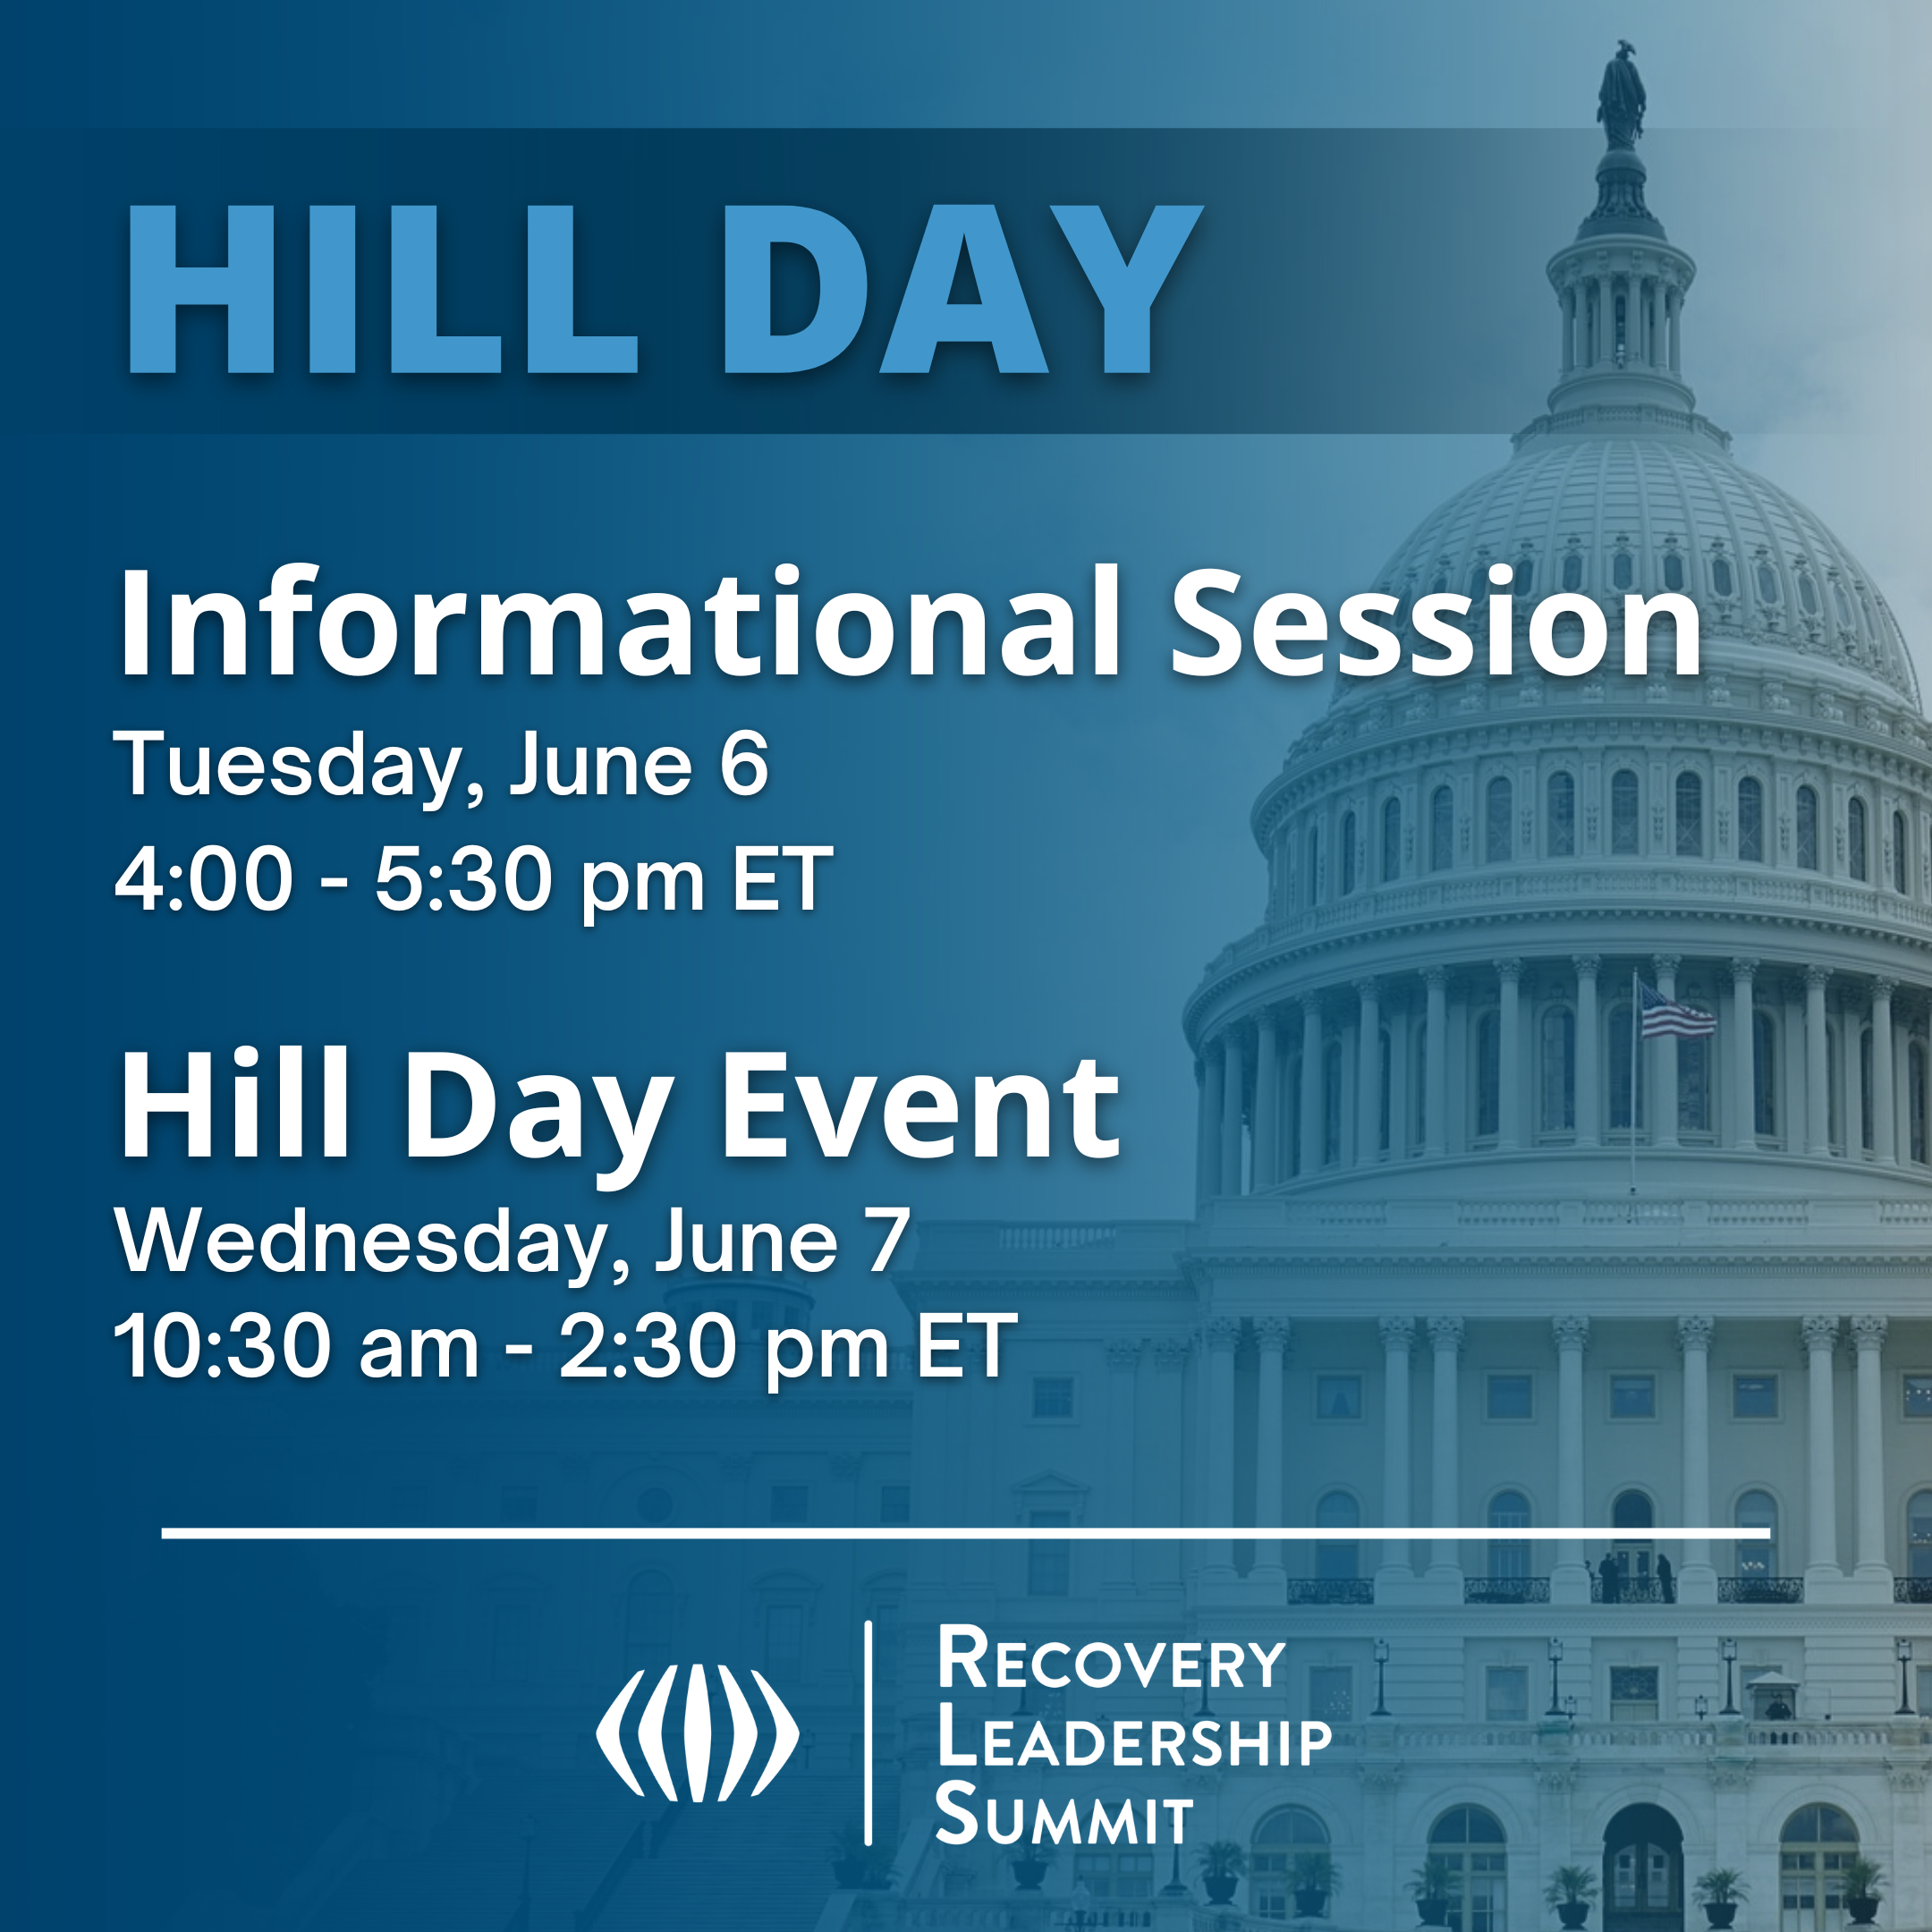 Hill Day Informational Session, Tuesday June 6, 4-5:30pm ET Hill Day Event Wednesday, June 7, 10:30am - 2:30 pm ET